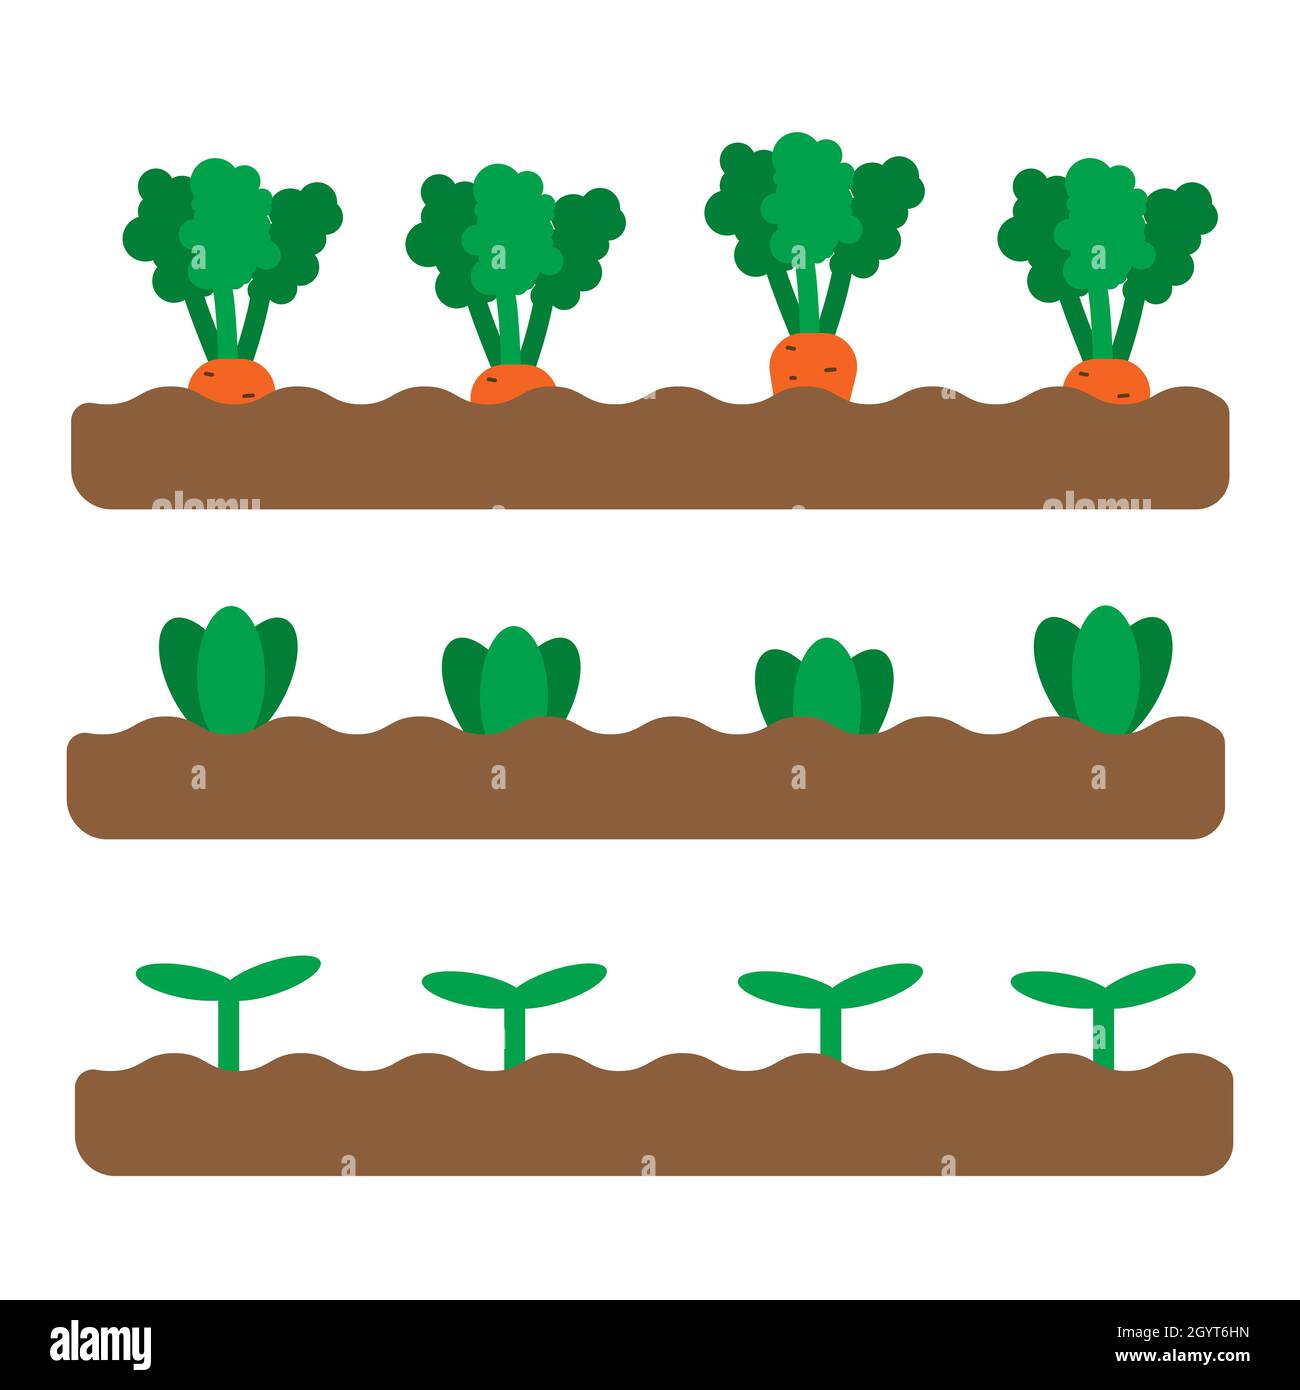 Set of 3 garden beds with different growing vegetables and plants. Flat spring garden illustration. Gardening icons. Vector illustration in cartoon fl Stock Vector